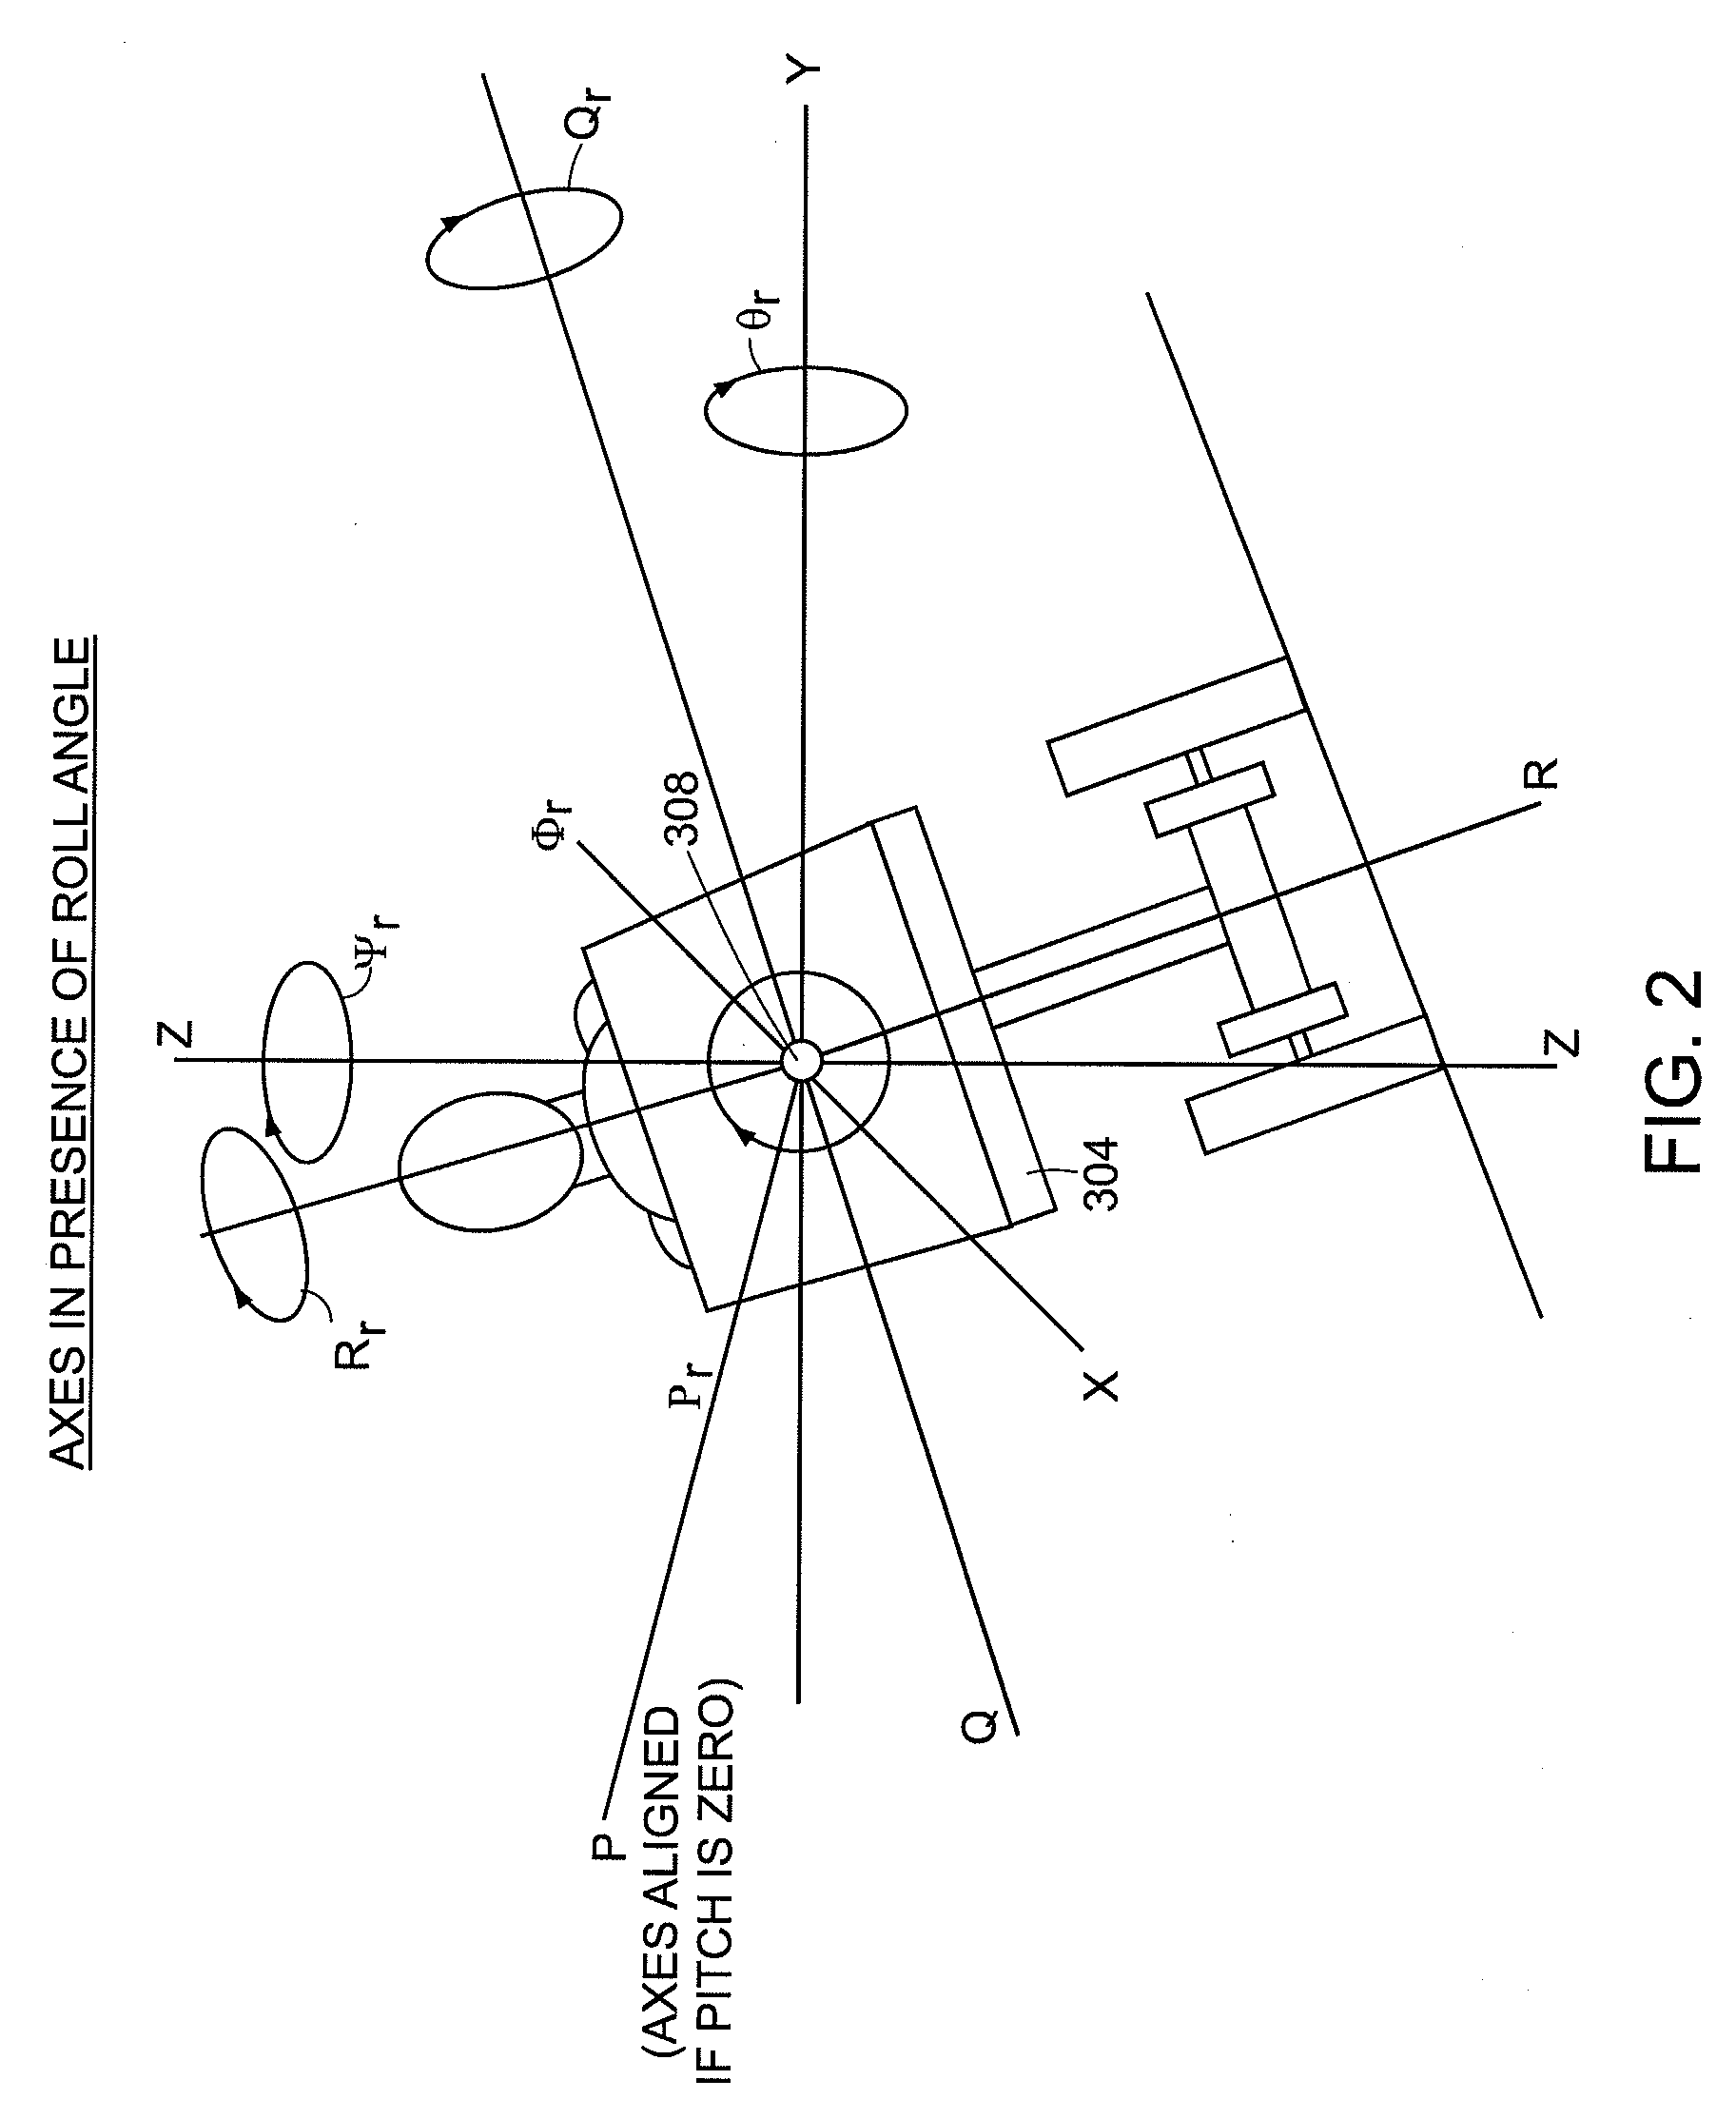 Apparatus and Method for Controlling Vehicle Motion